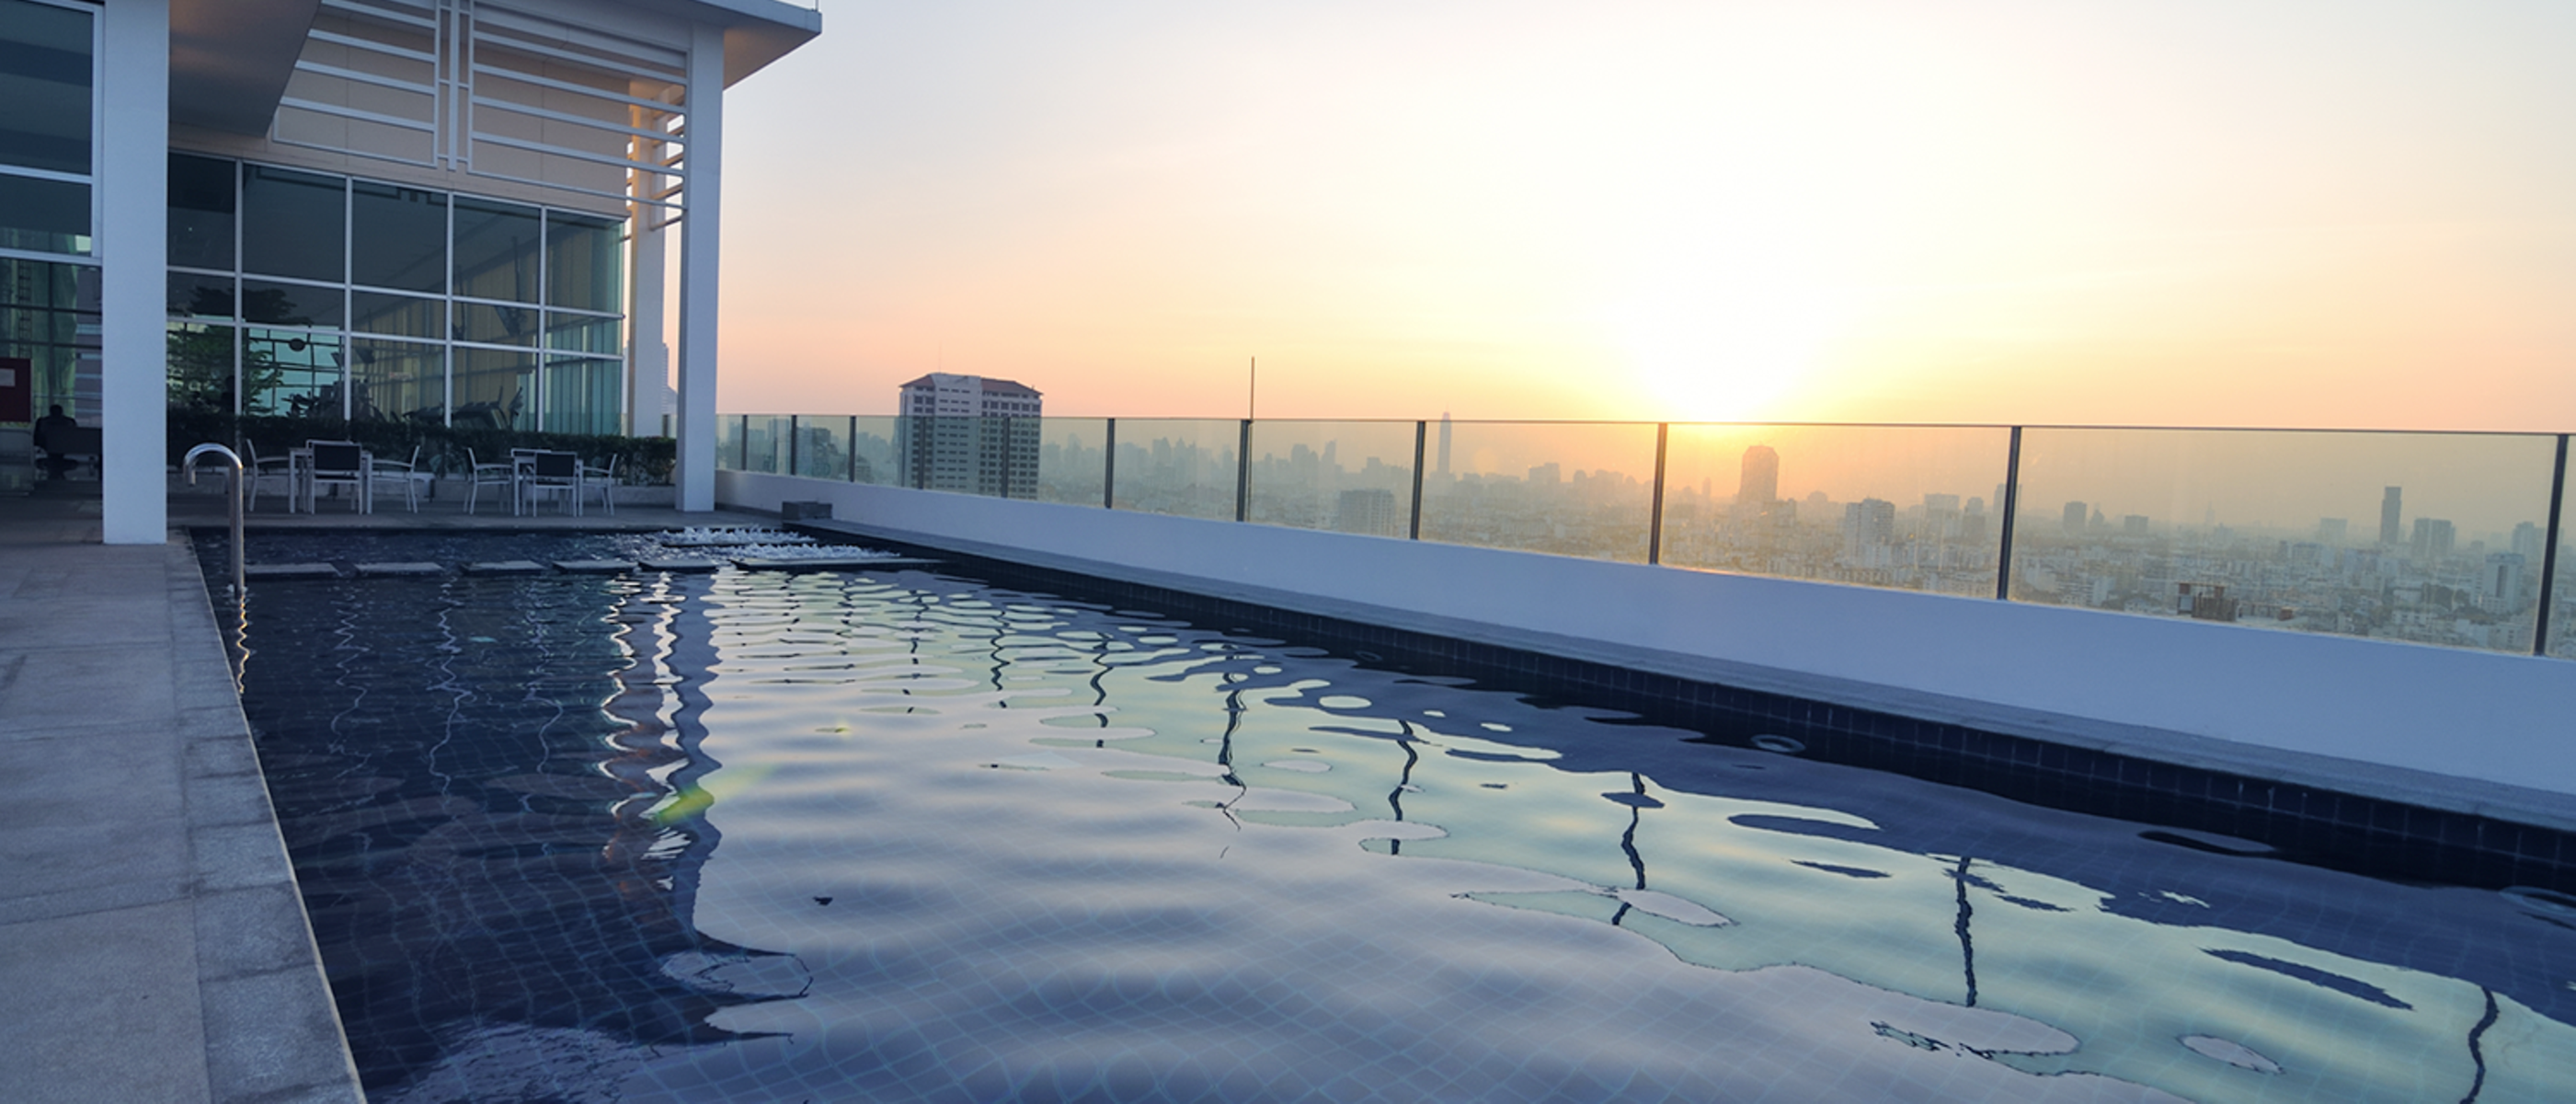 Pressure booster systems for high-rise buildings: Pool on top of a skyscraper